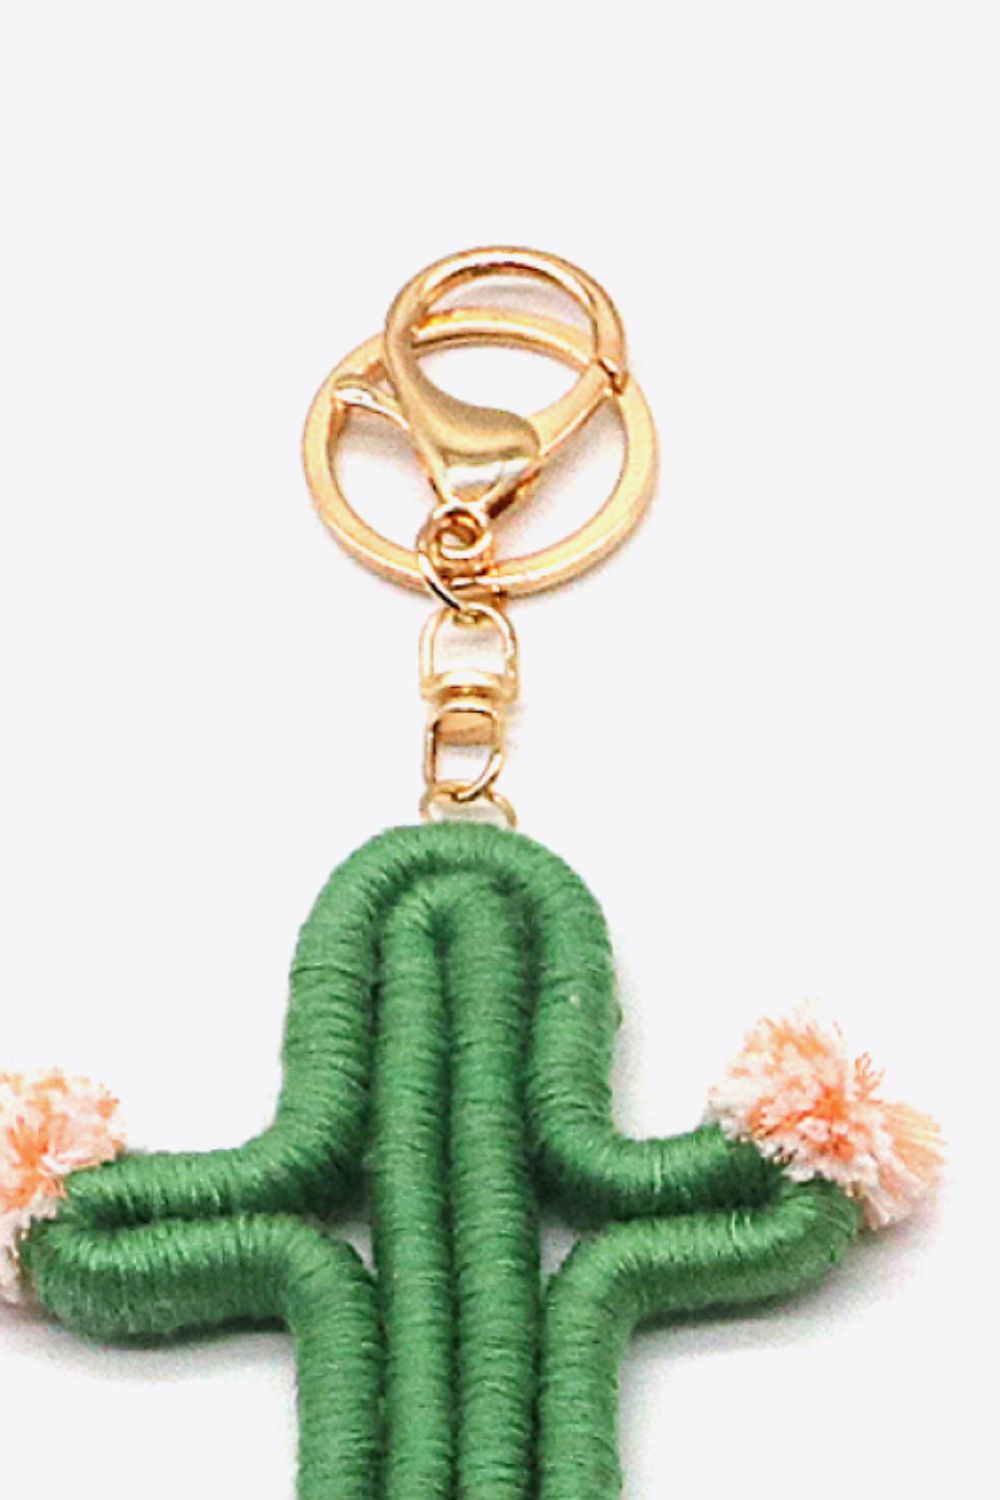 Assorted Hand-Woven Keychain with Clasp